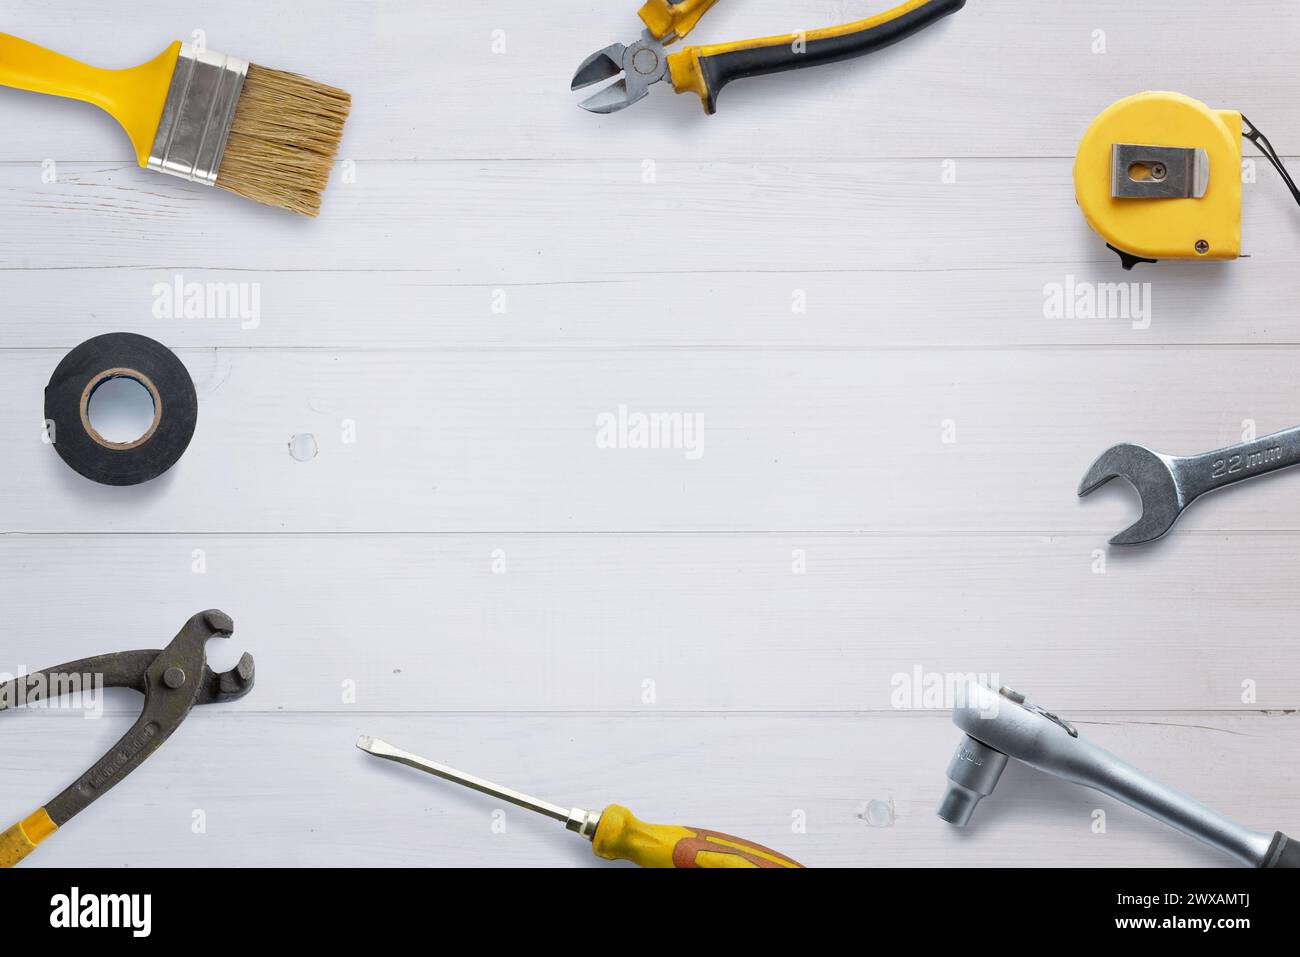 Top view of assorted tools neatly arranged on a white wooden desk, with copy space in the center. Flat lay composition ideal for DIY concept promotion Stock Photo